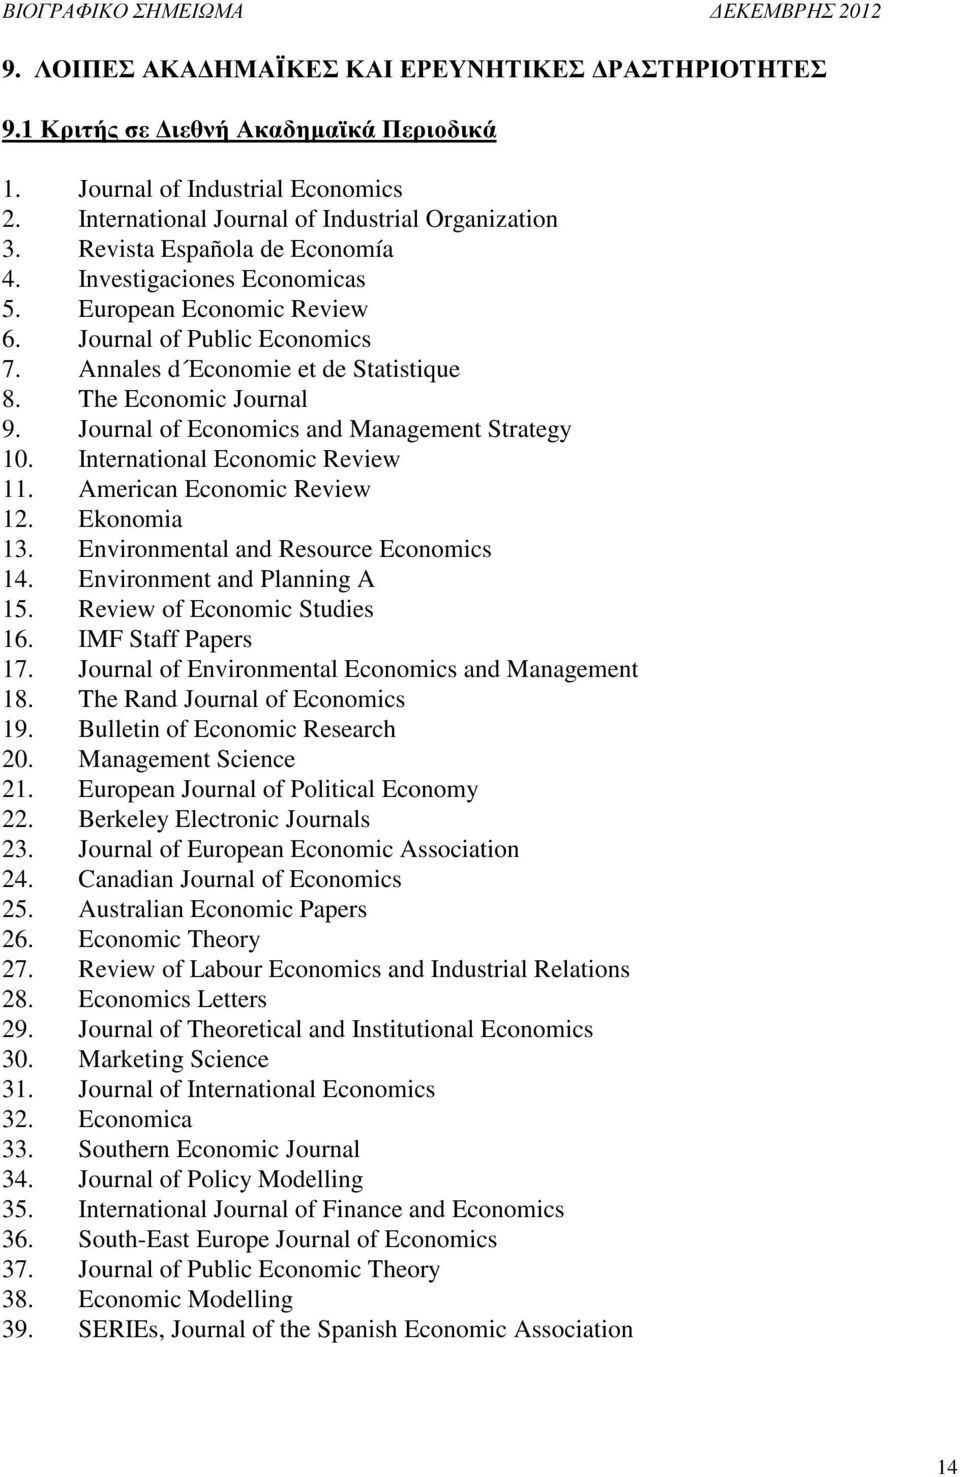 Journal of Economics and Management Strategy 10. International Economic Review 11. American Economic Review 12. Ekonomia 13. Environmental and Resource Economics 14. Environment and Planning A 15.